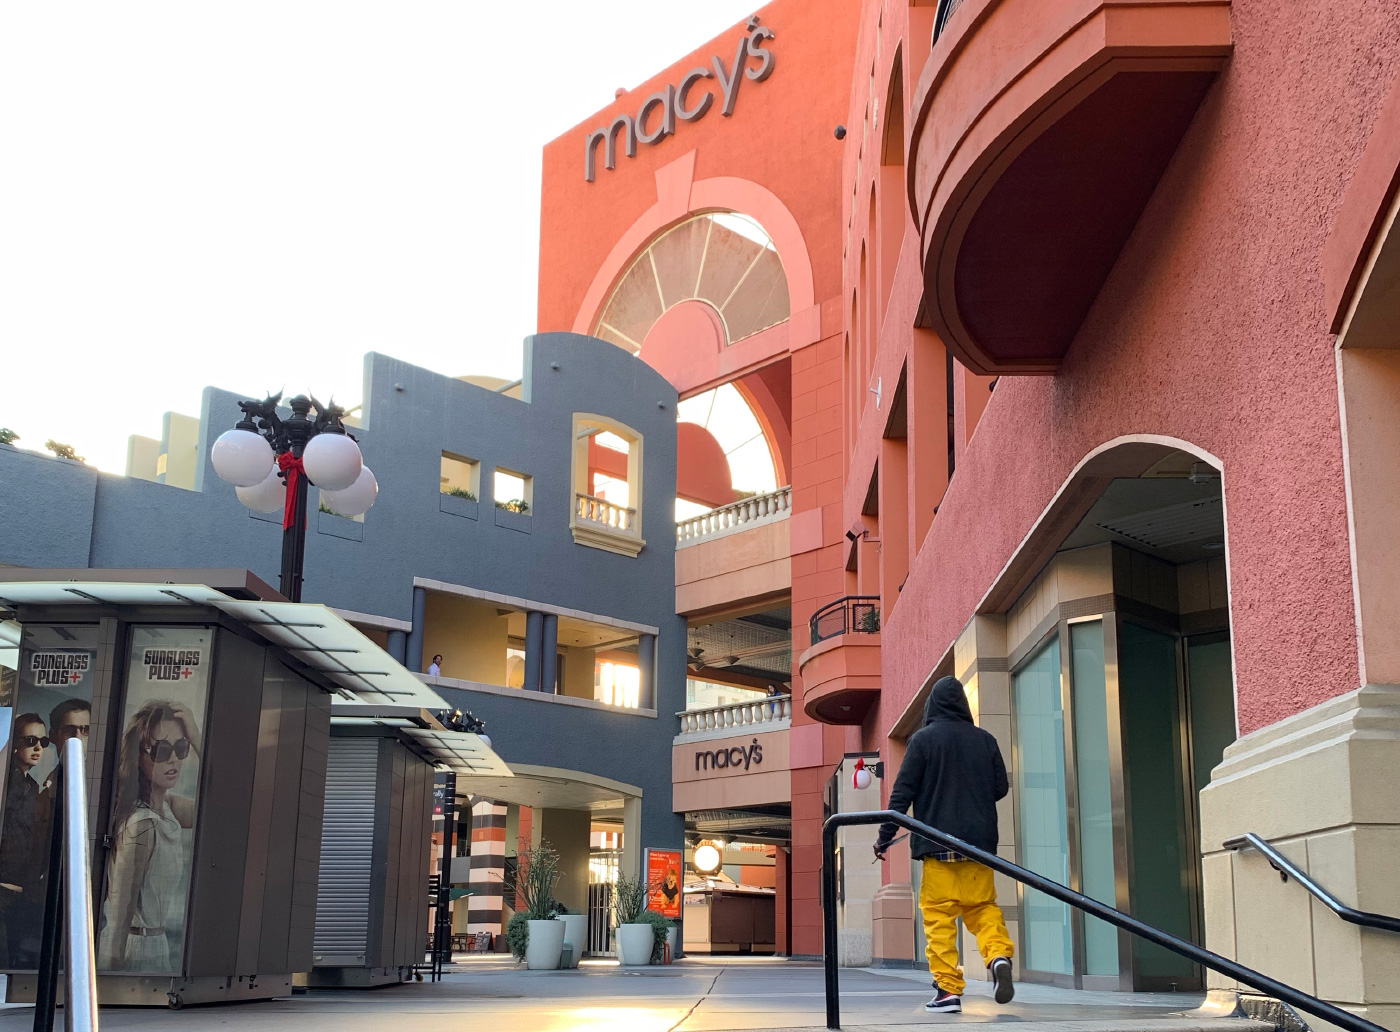 Ground-level view of a postmodern mall complex at horton plaza